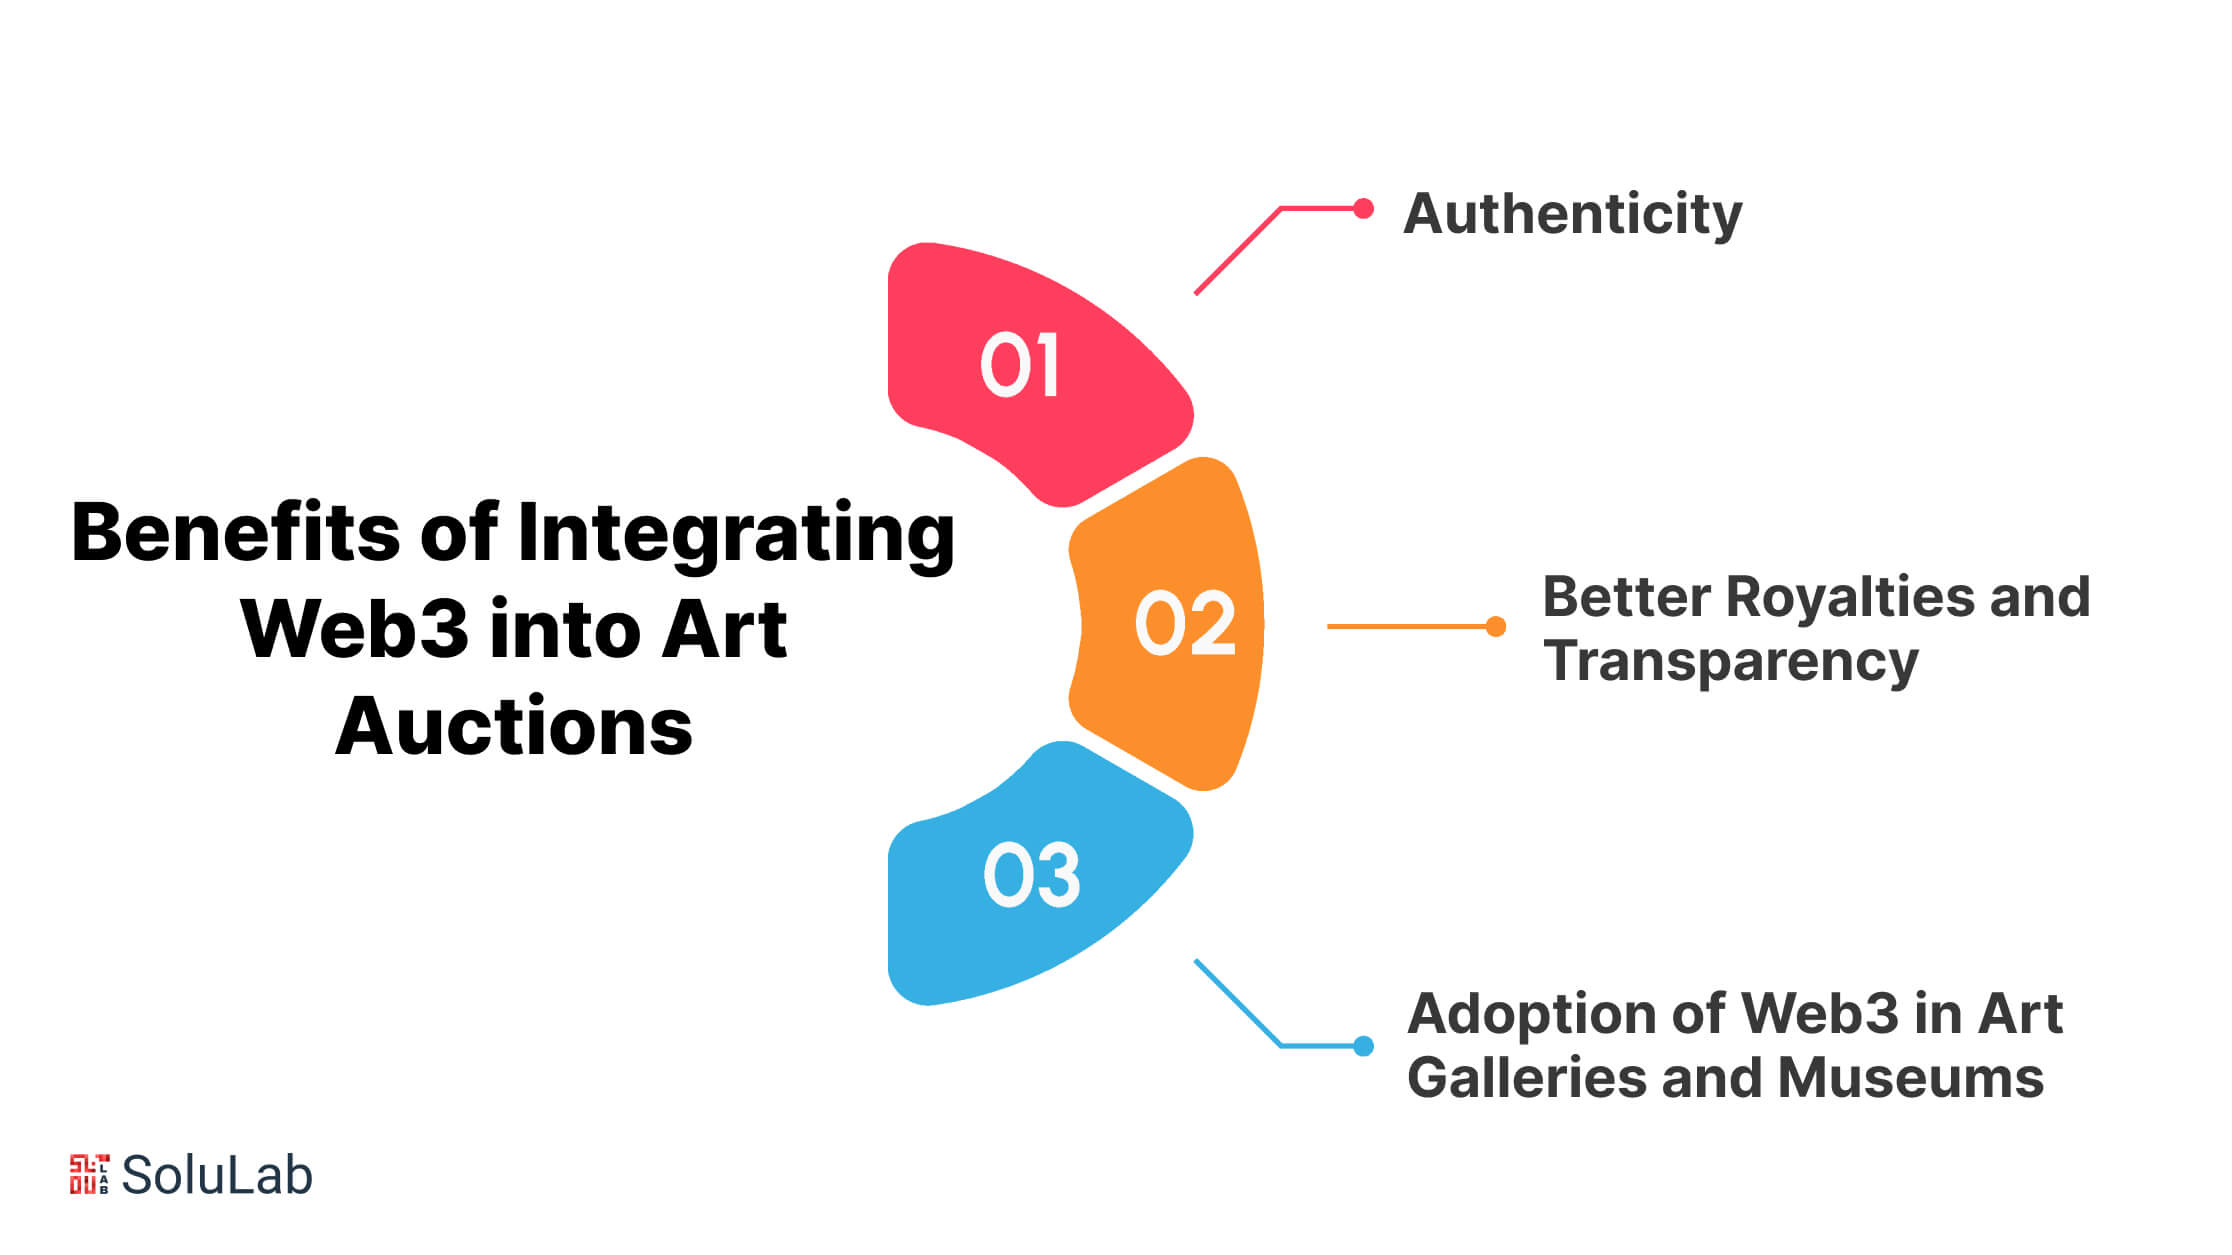 Benefits of Integrating Web3 into Art Auctions